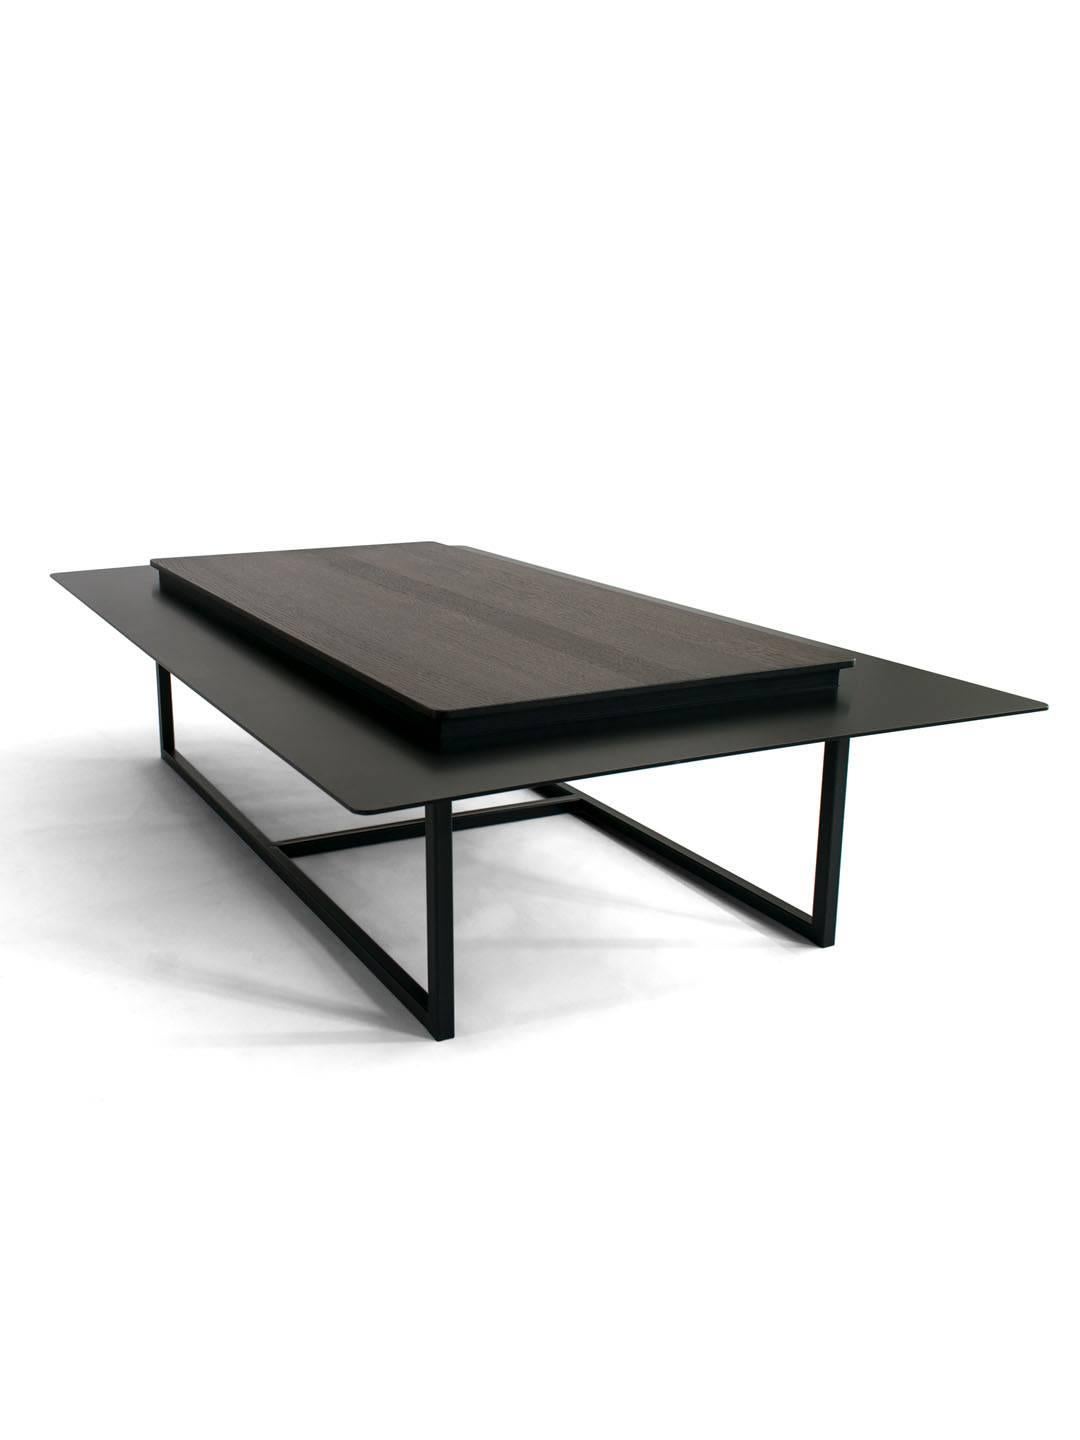 Tungen Coffee Table, Jan Garncarek
Materials: Steel, wood.
Dimensions: 33 x 130 x 80 cm.
Weight: 60 kg

The table consists of a wood top with a metal collar. This will enable the separation of everyday objects from those, that we want to expose on